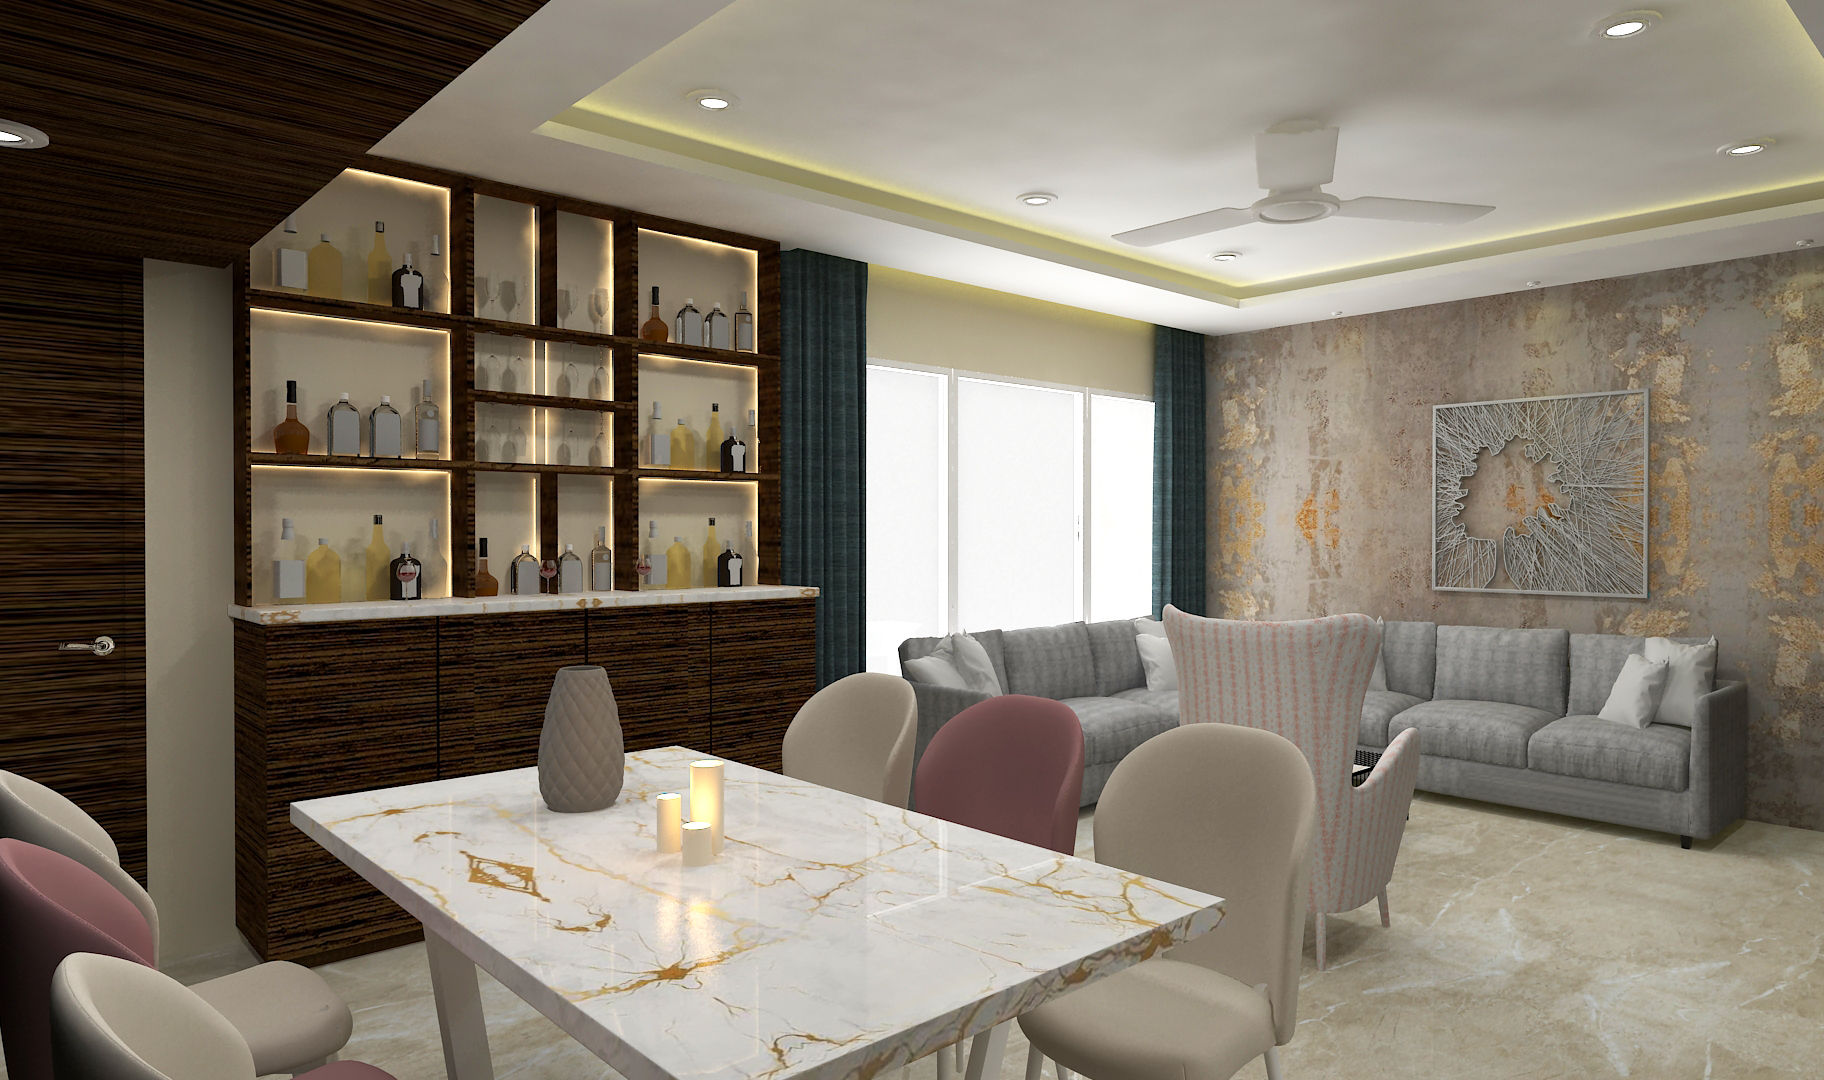 3bhk residence, Nerul Sector 27, SPACE DESIGN STUDIOS SPACE DESIGN STUDIOS Salones de estilo moderno Contrachapado